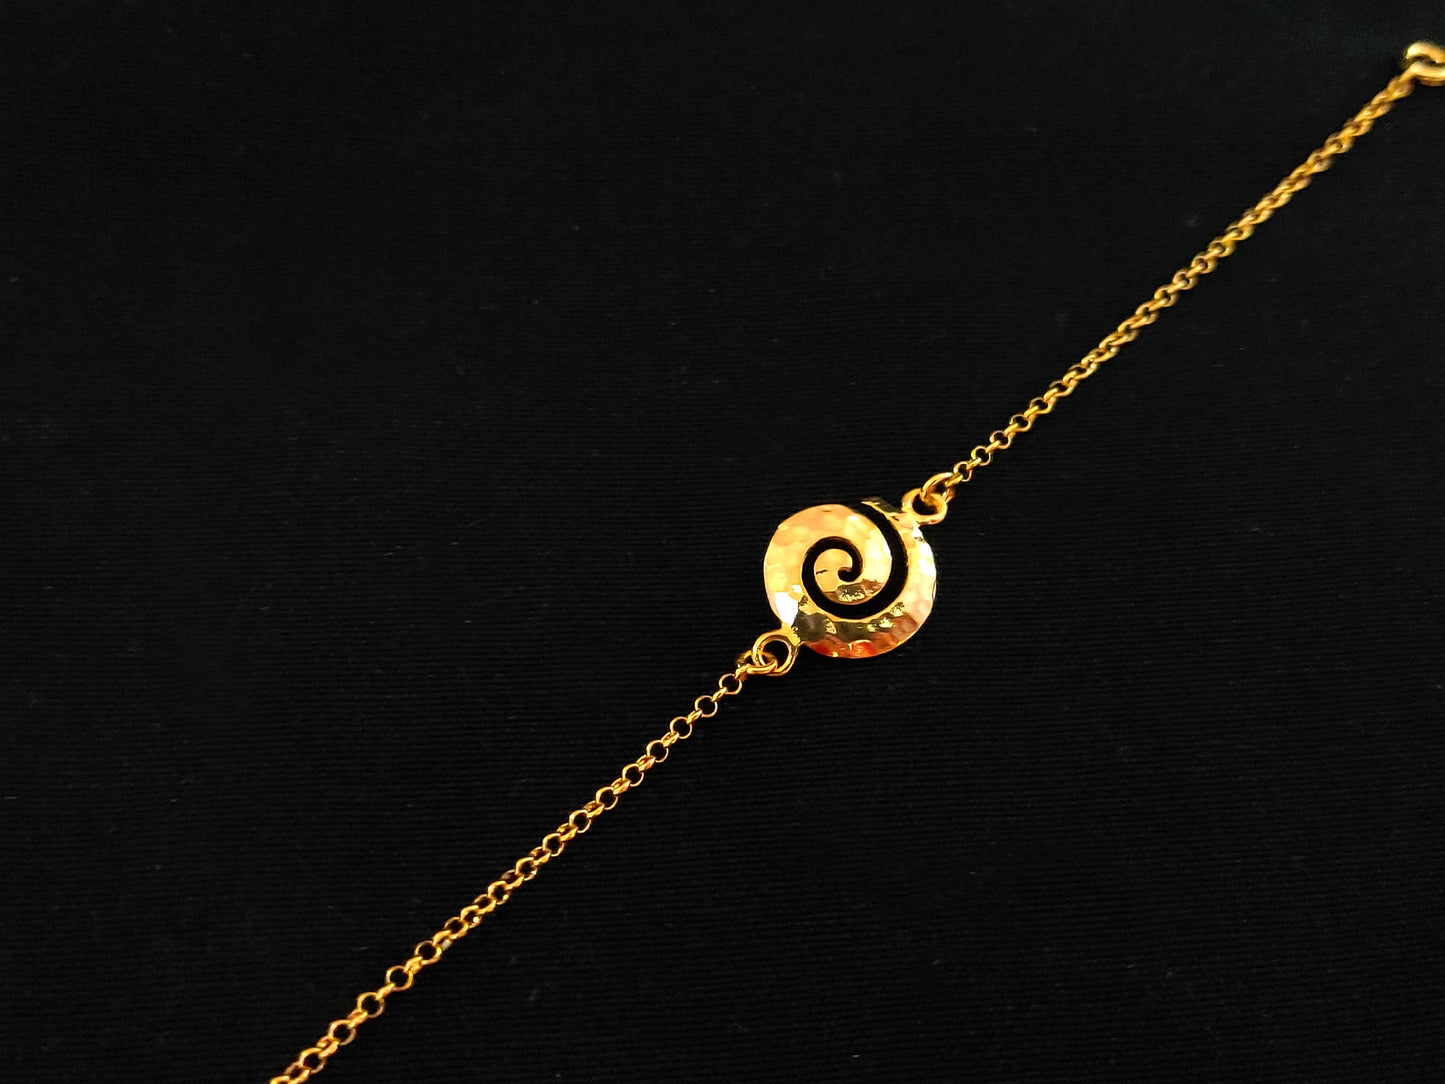 Sterling Silver 925 Ancient Greek Hammered Spiral Circle Of Life Fine Chain Gold Plated Adjustable Bracelet 15mm, Griechischer Armband